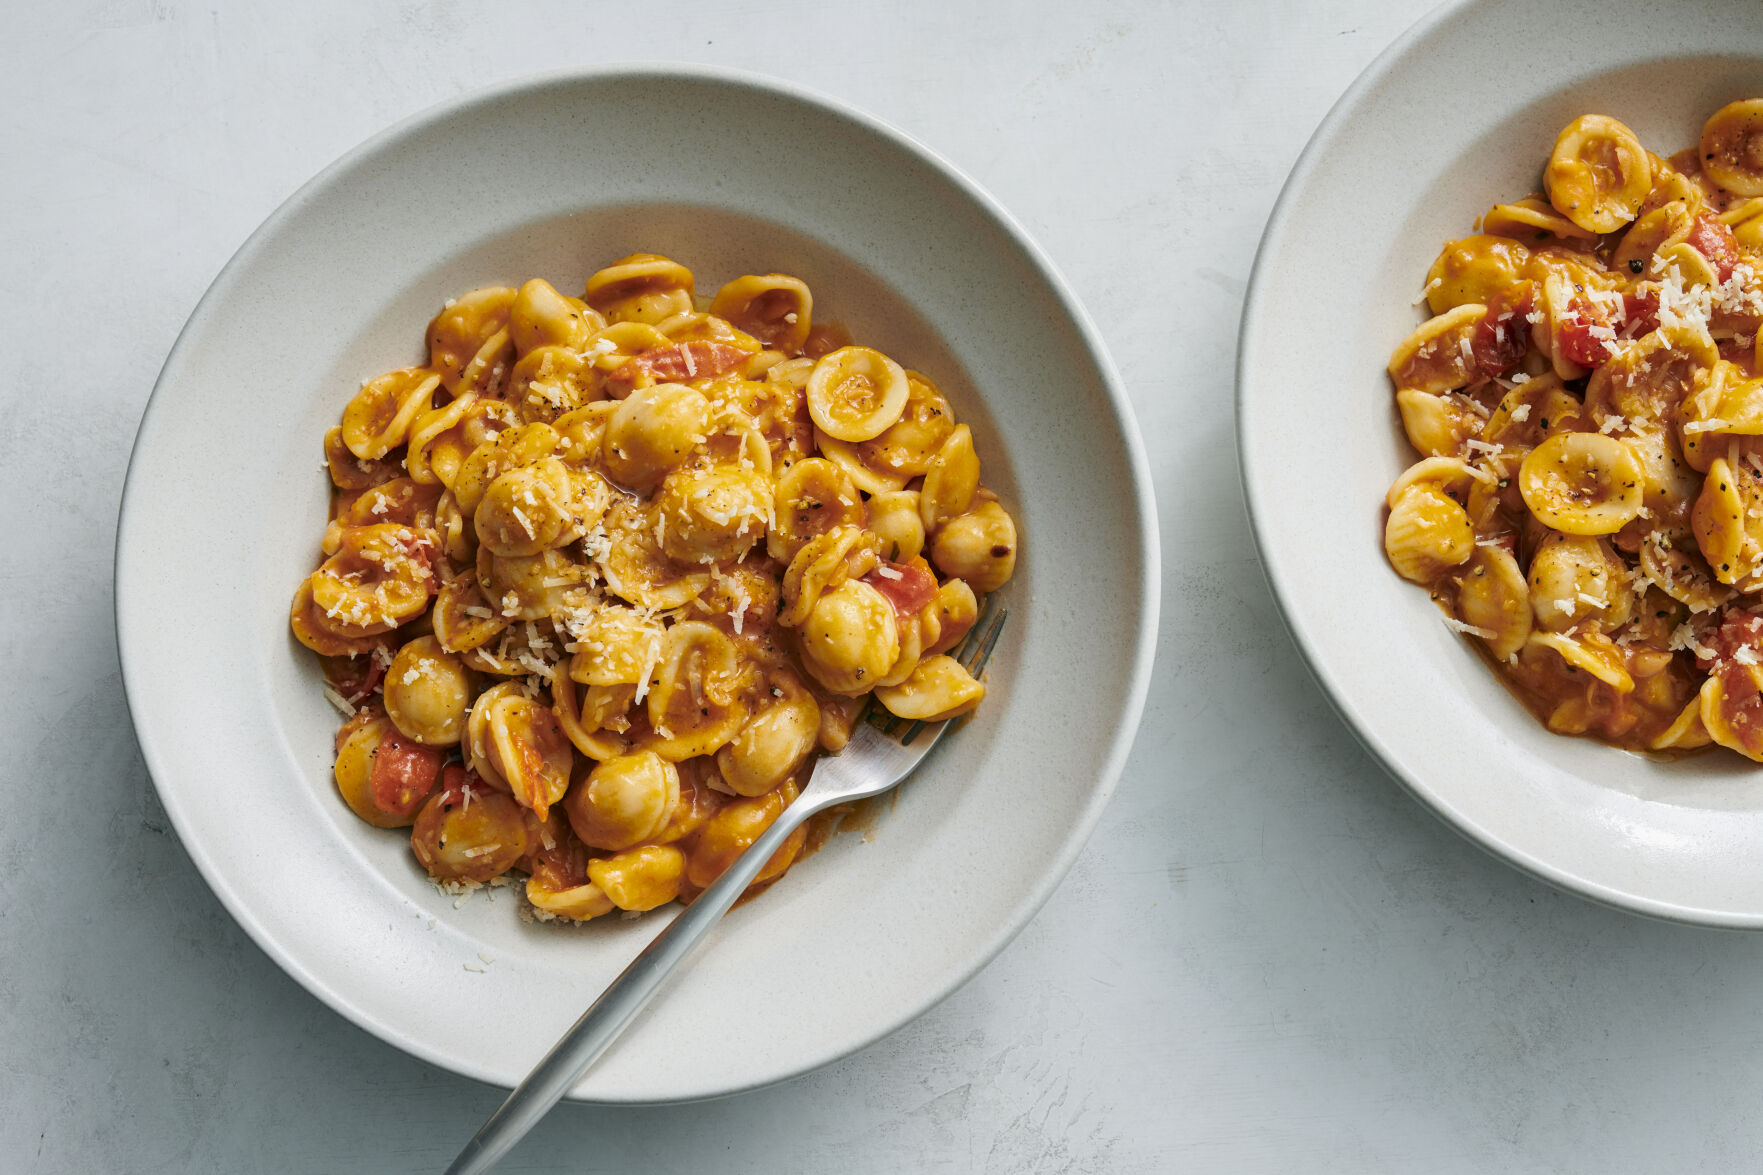 An easy, summery tomato pasta thats ready for fall Living myheraldreview